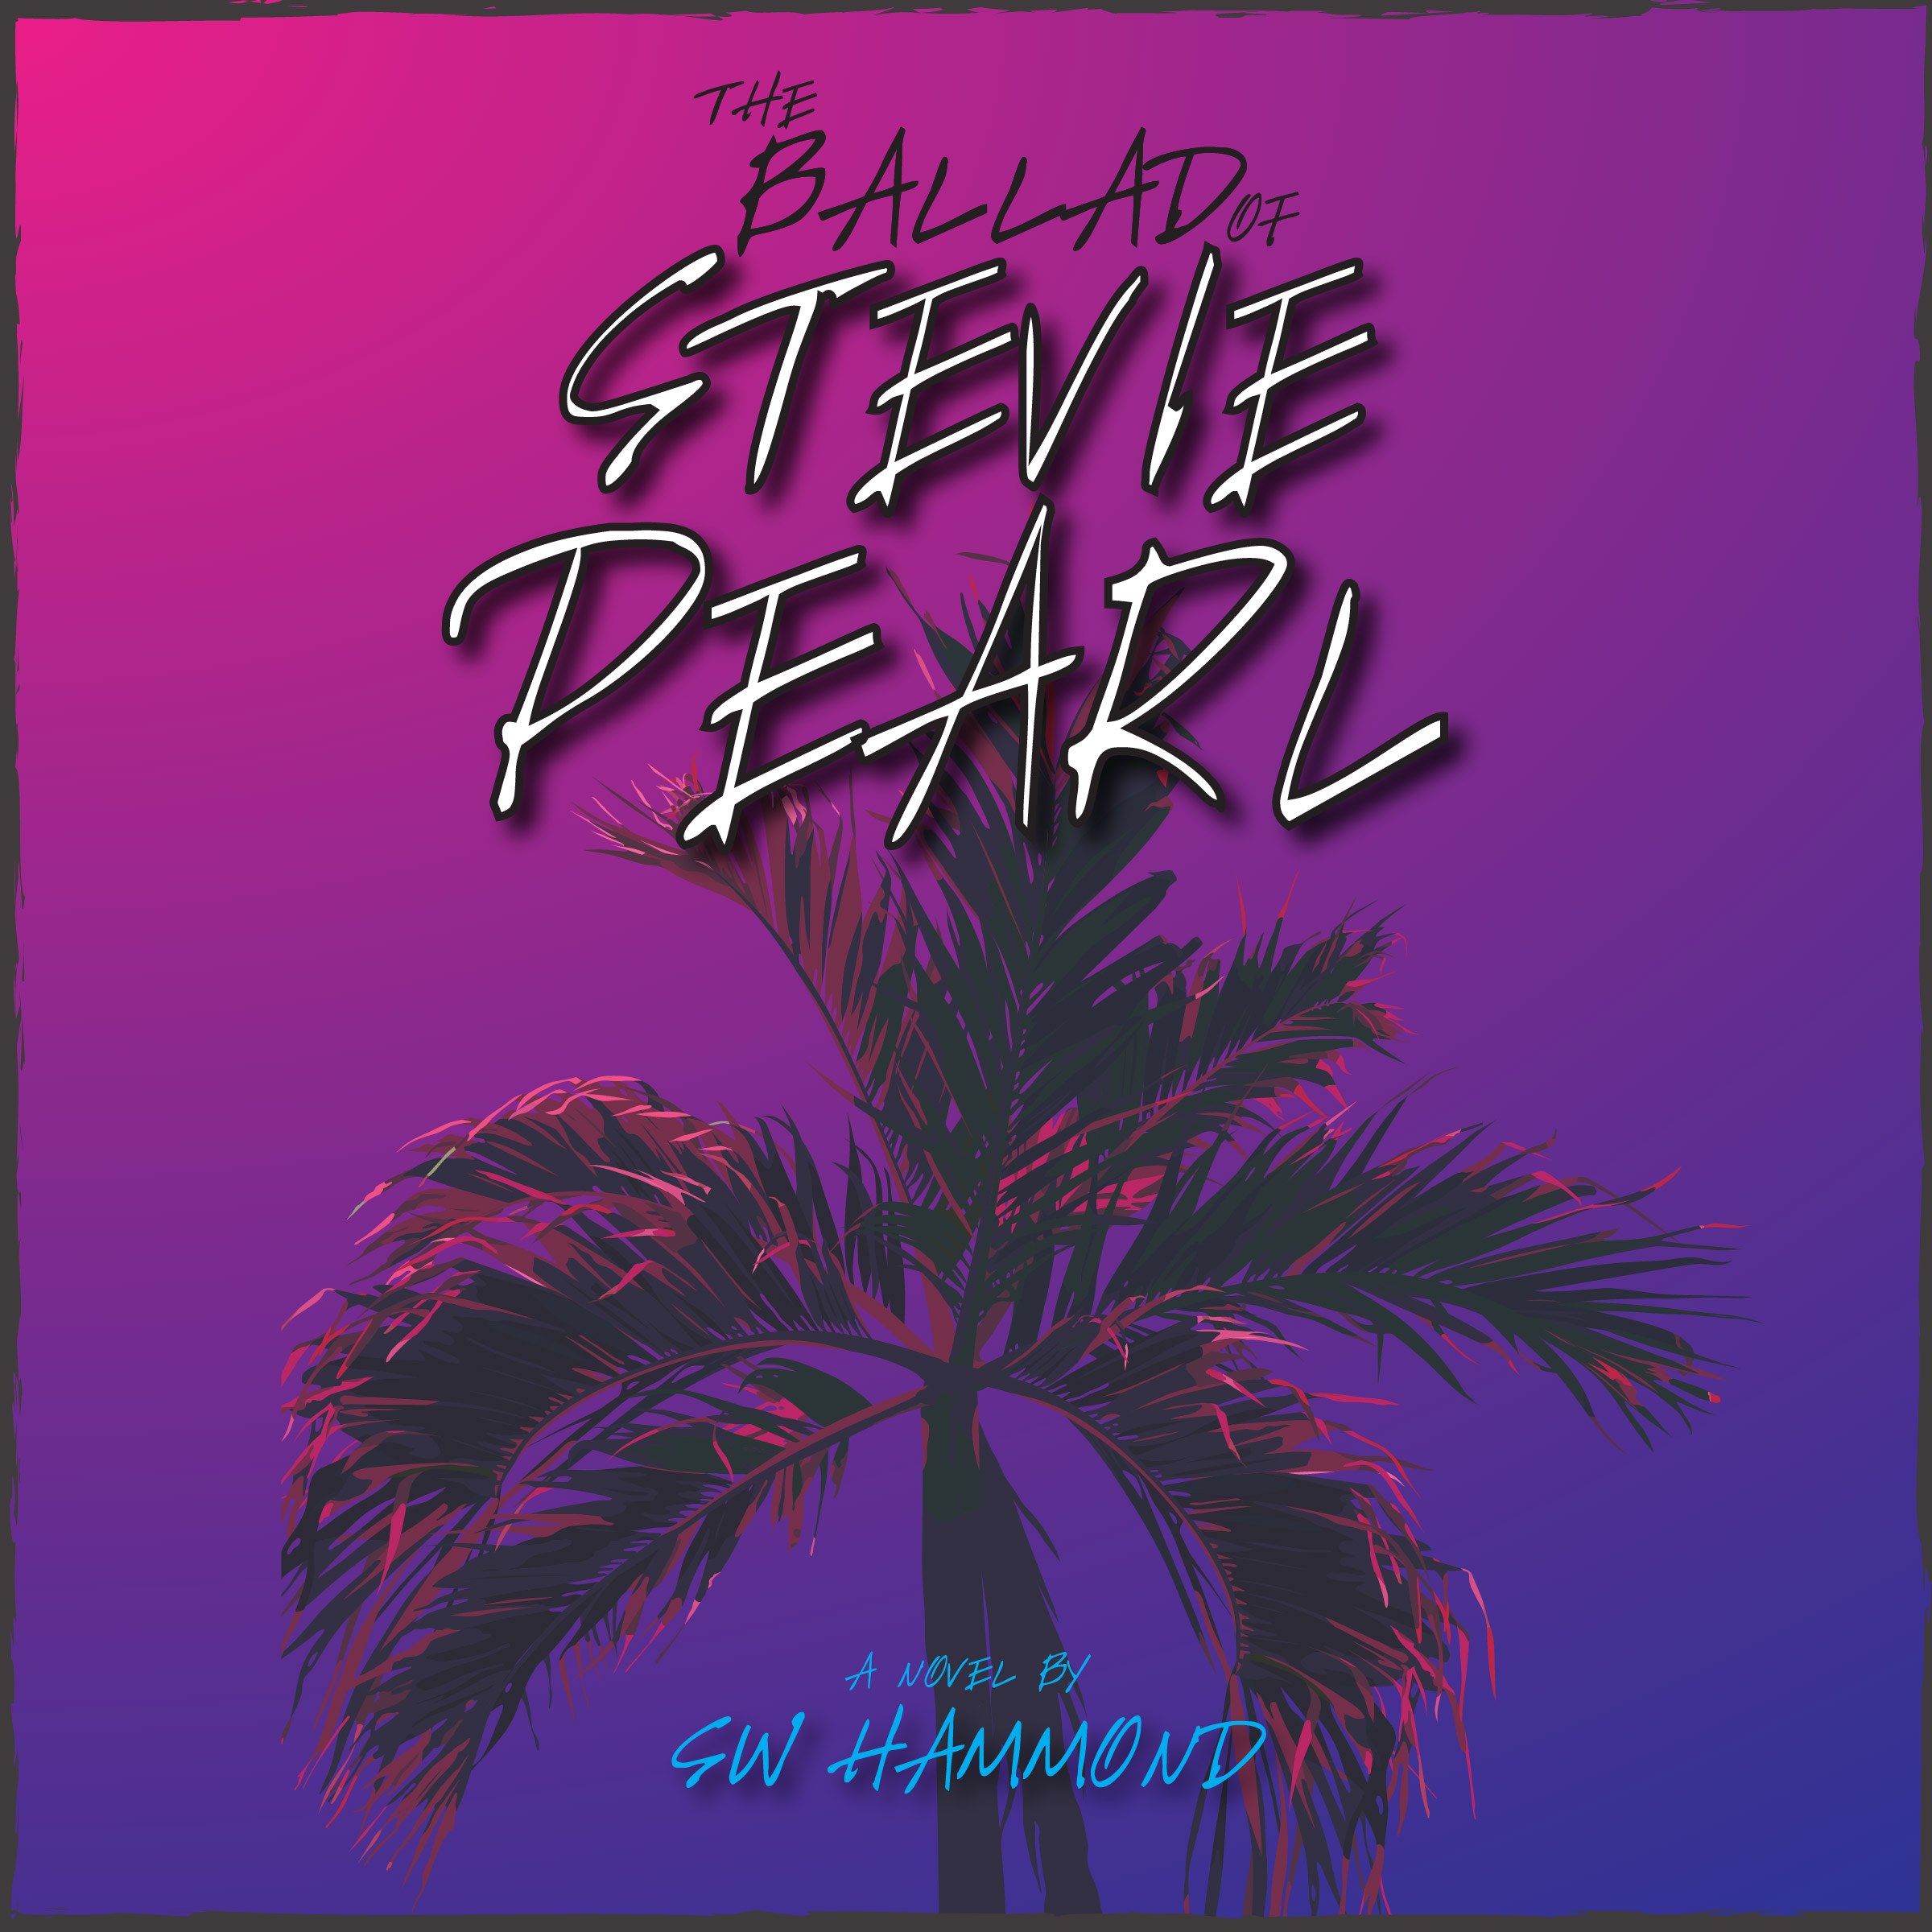 The Ballad of Stevie Pearl - Soundtrack